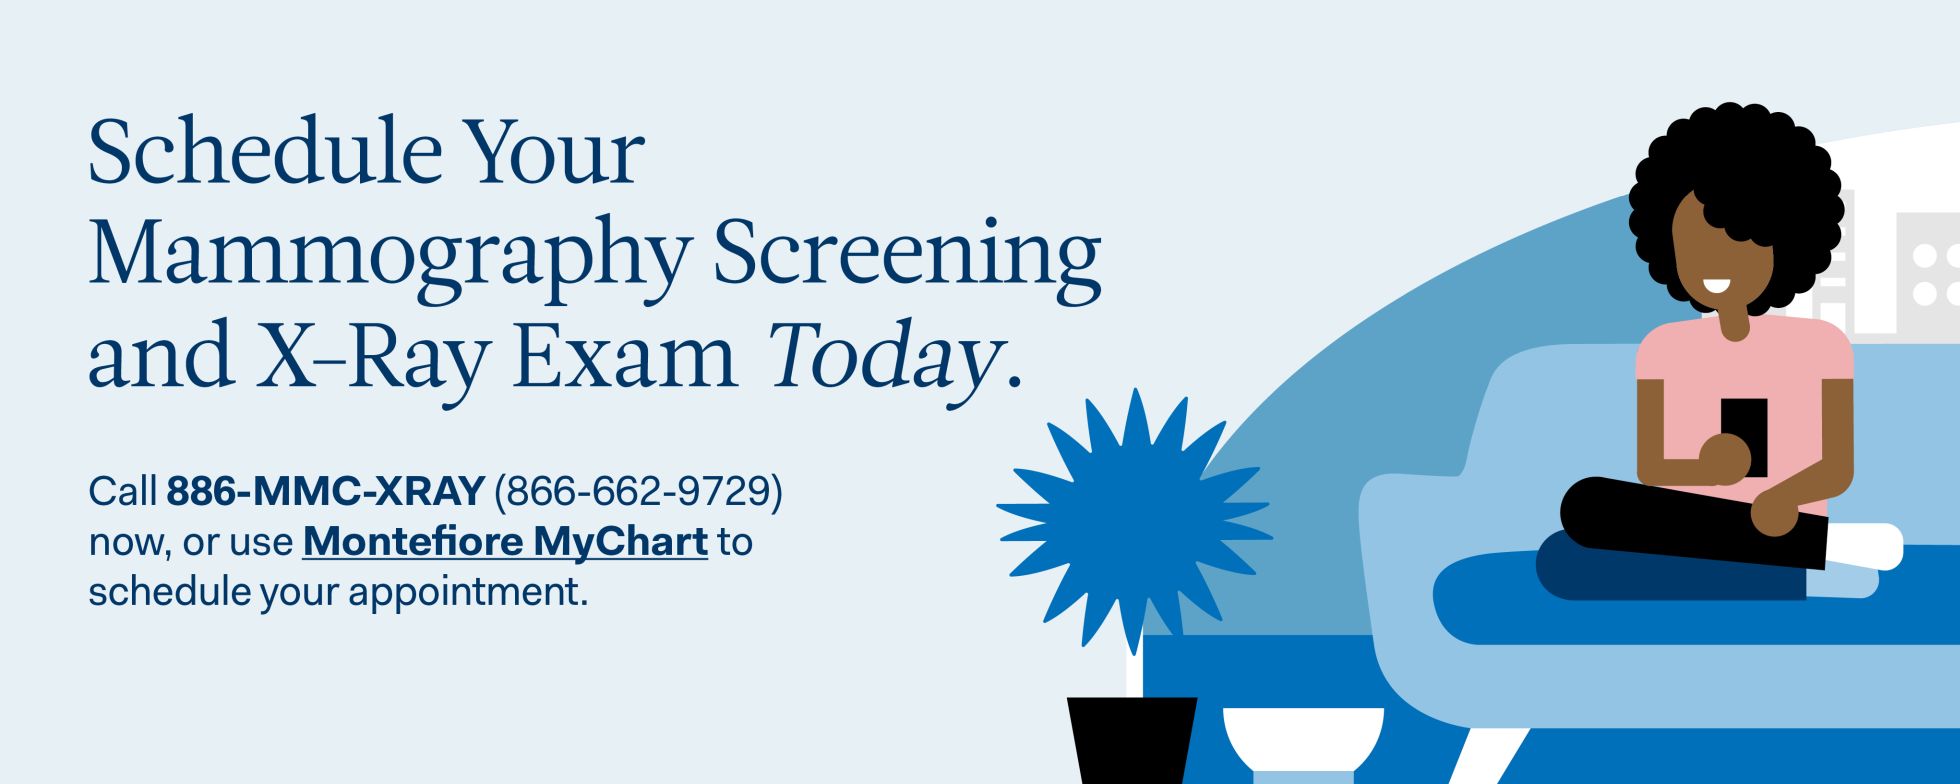 Get your mammography screening and x-ray examtoday